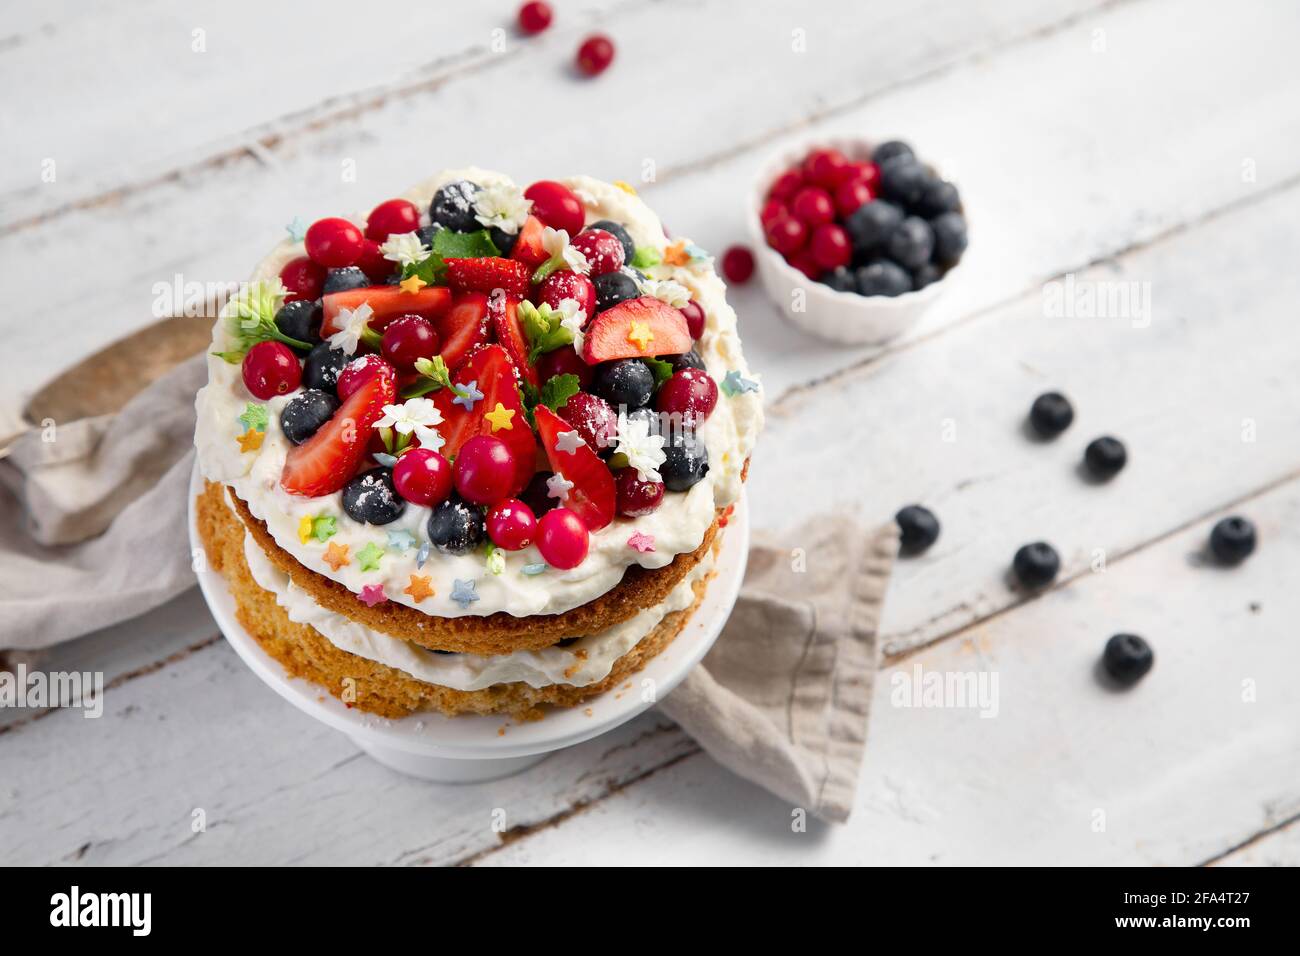 Delicious homemade cake with fresh berries and mascarpone cream on wooden background. Top view, copy space Stock Photo